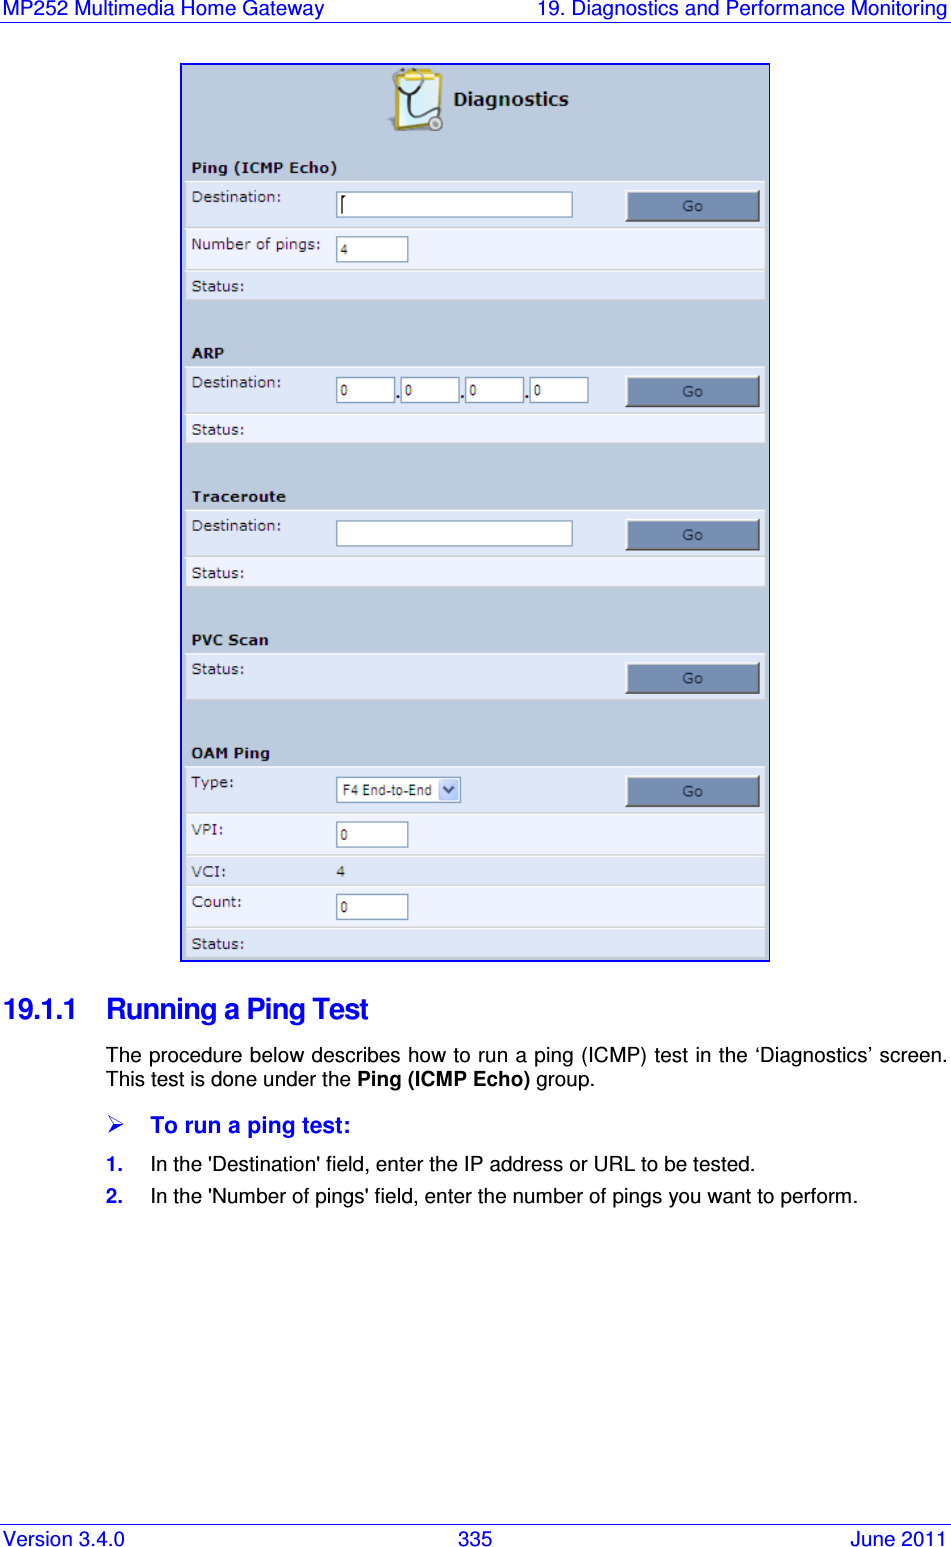 MP252 Multimedia Home Gateway  19. Diagnostics and Performance Monitoring Version 3.4.0  335  June 2011  19.1.1  Running a Ping Test The procedure below describes how to run a ping (ICMP) test in the ‘Diagnostics’ screen. This test is done under the Ping (ICMP Echo) group.  To run a ping test: 1.  In the &apos;Destination&apos; field, enter the IP address or URL to be tested. 2.  In the &apos;Number of pings&apos; field, enter the number of pings you want to perform. 